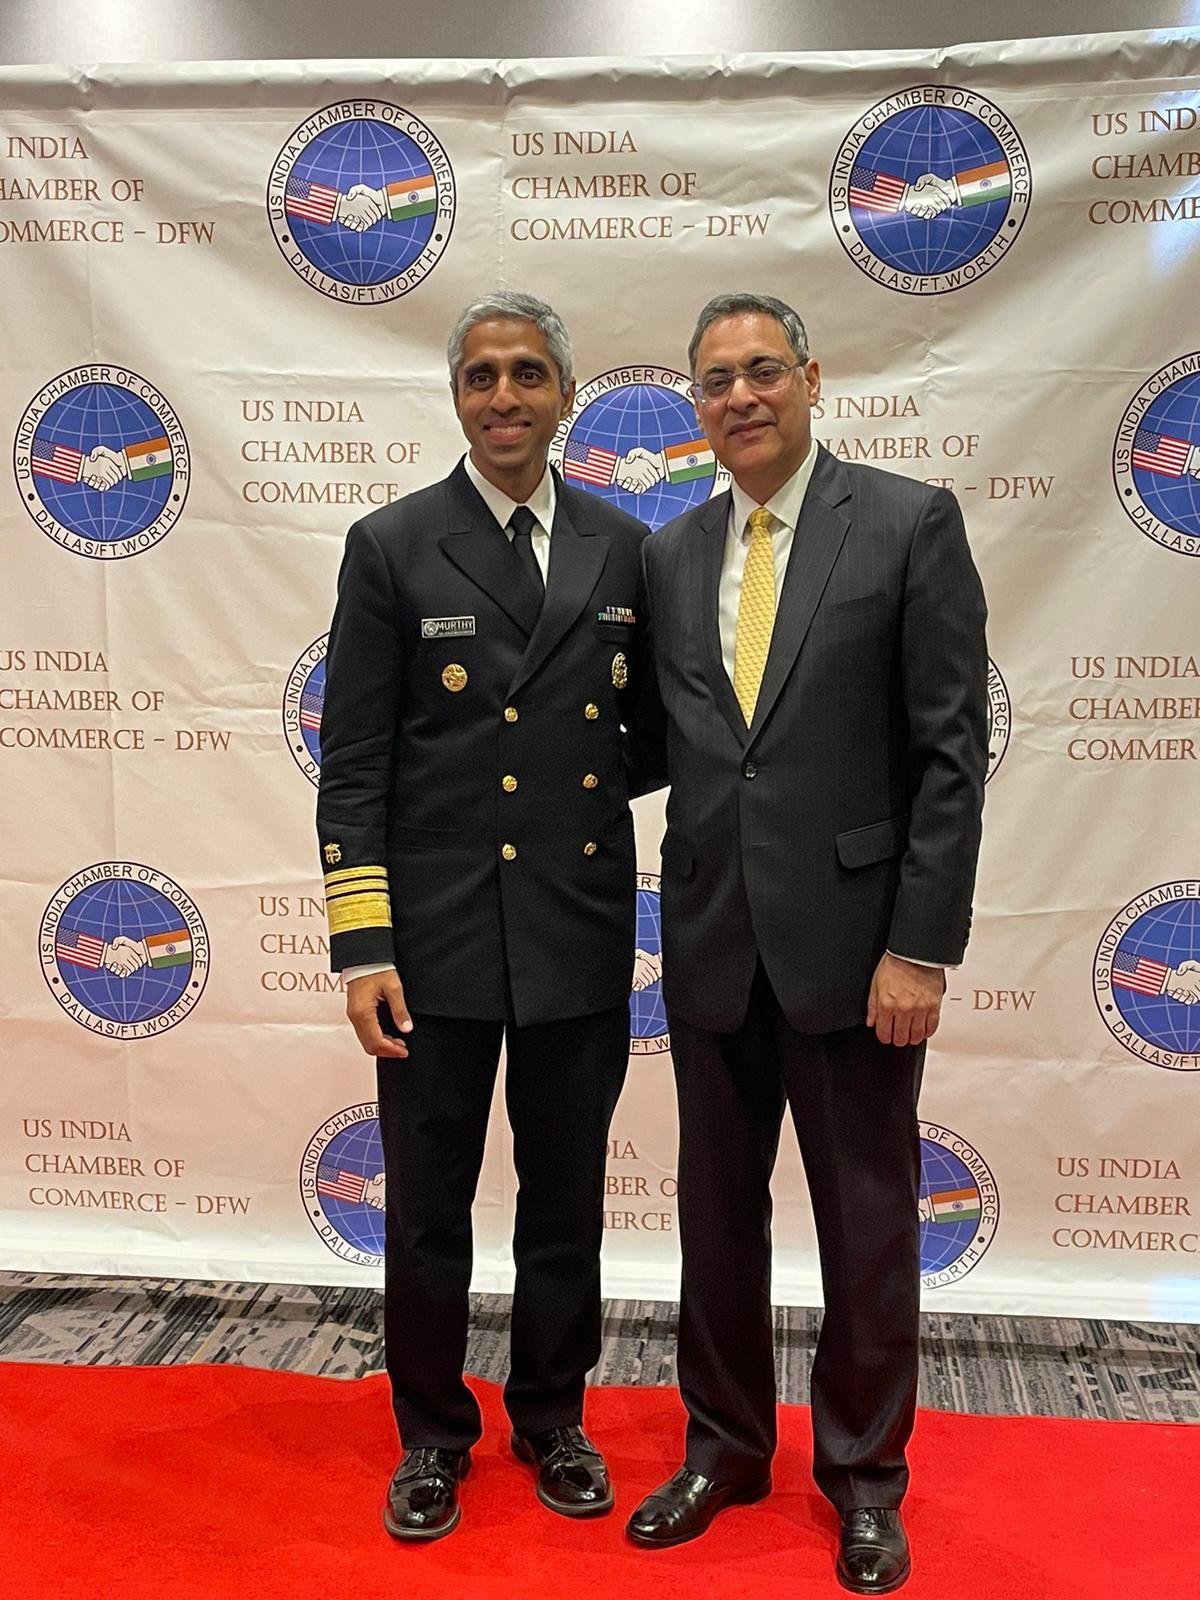 Consul General met Surgeon General  Vivek Murthy at the  ‘Wellness and Workplace Conference’ organized by the US India Chamber of Commerce, Dallas Fort Worth on September 23,2022